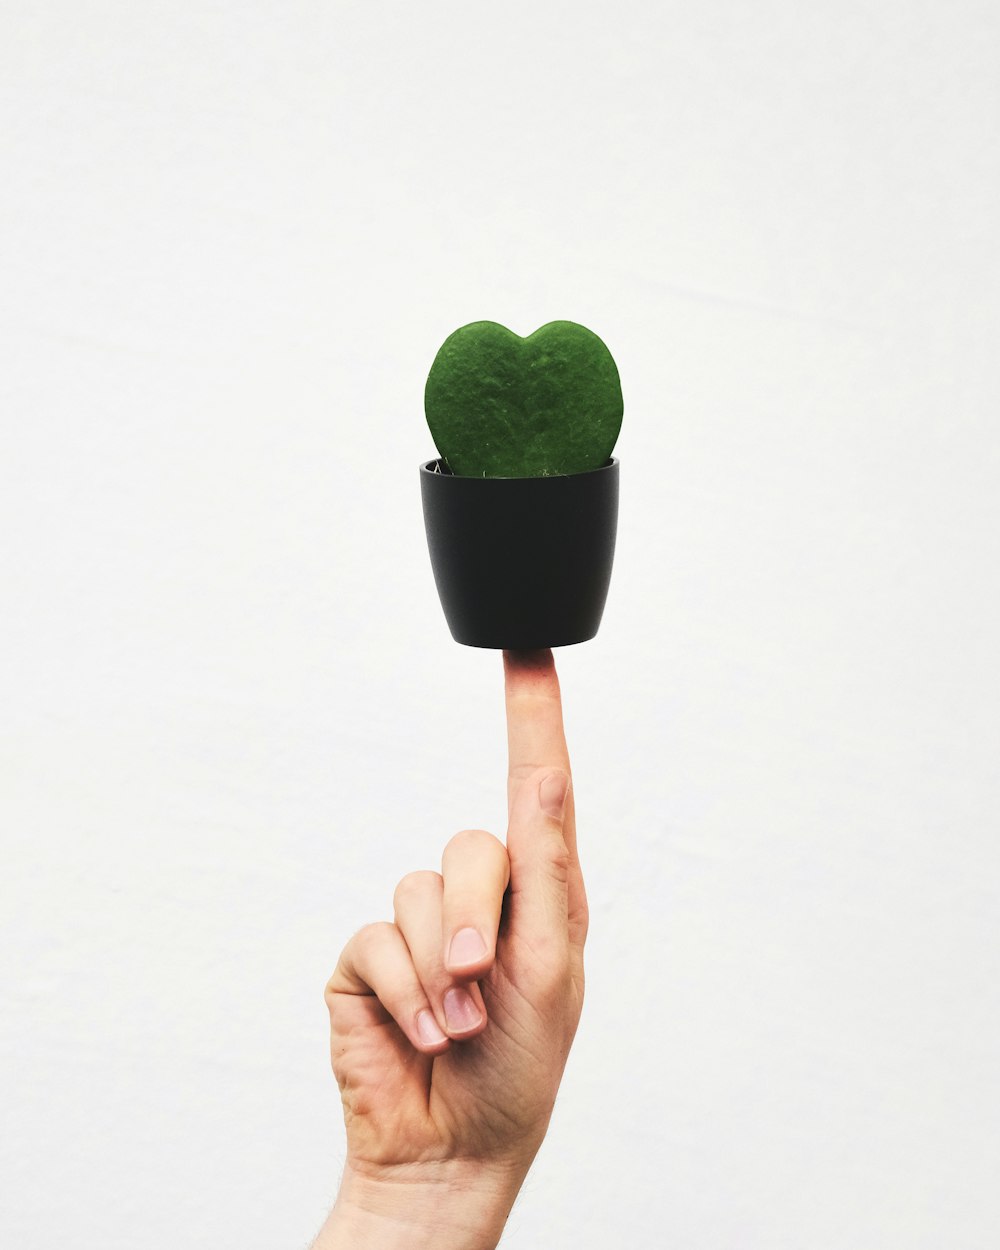 a hand holding a small green plant in a black pot